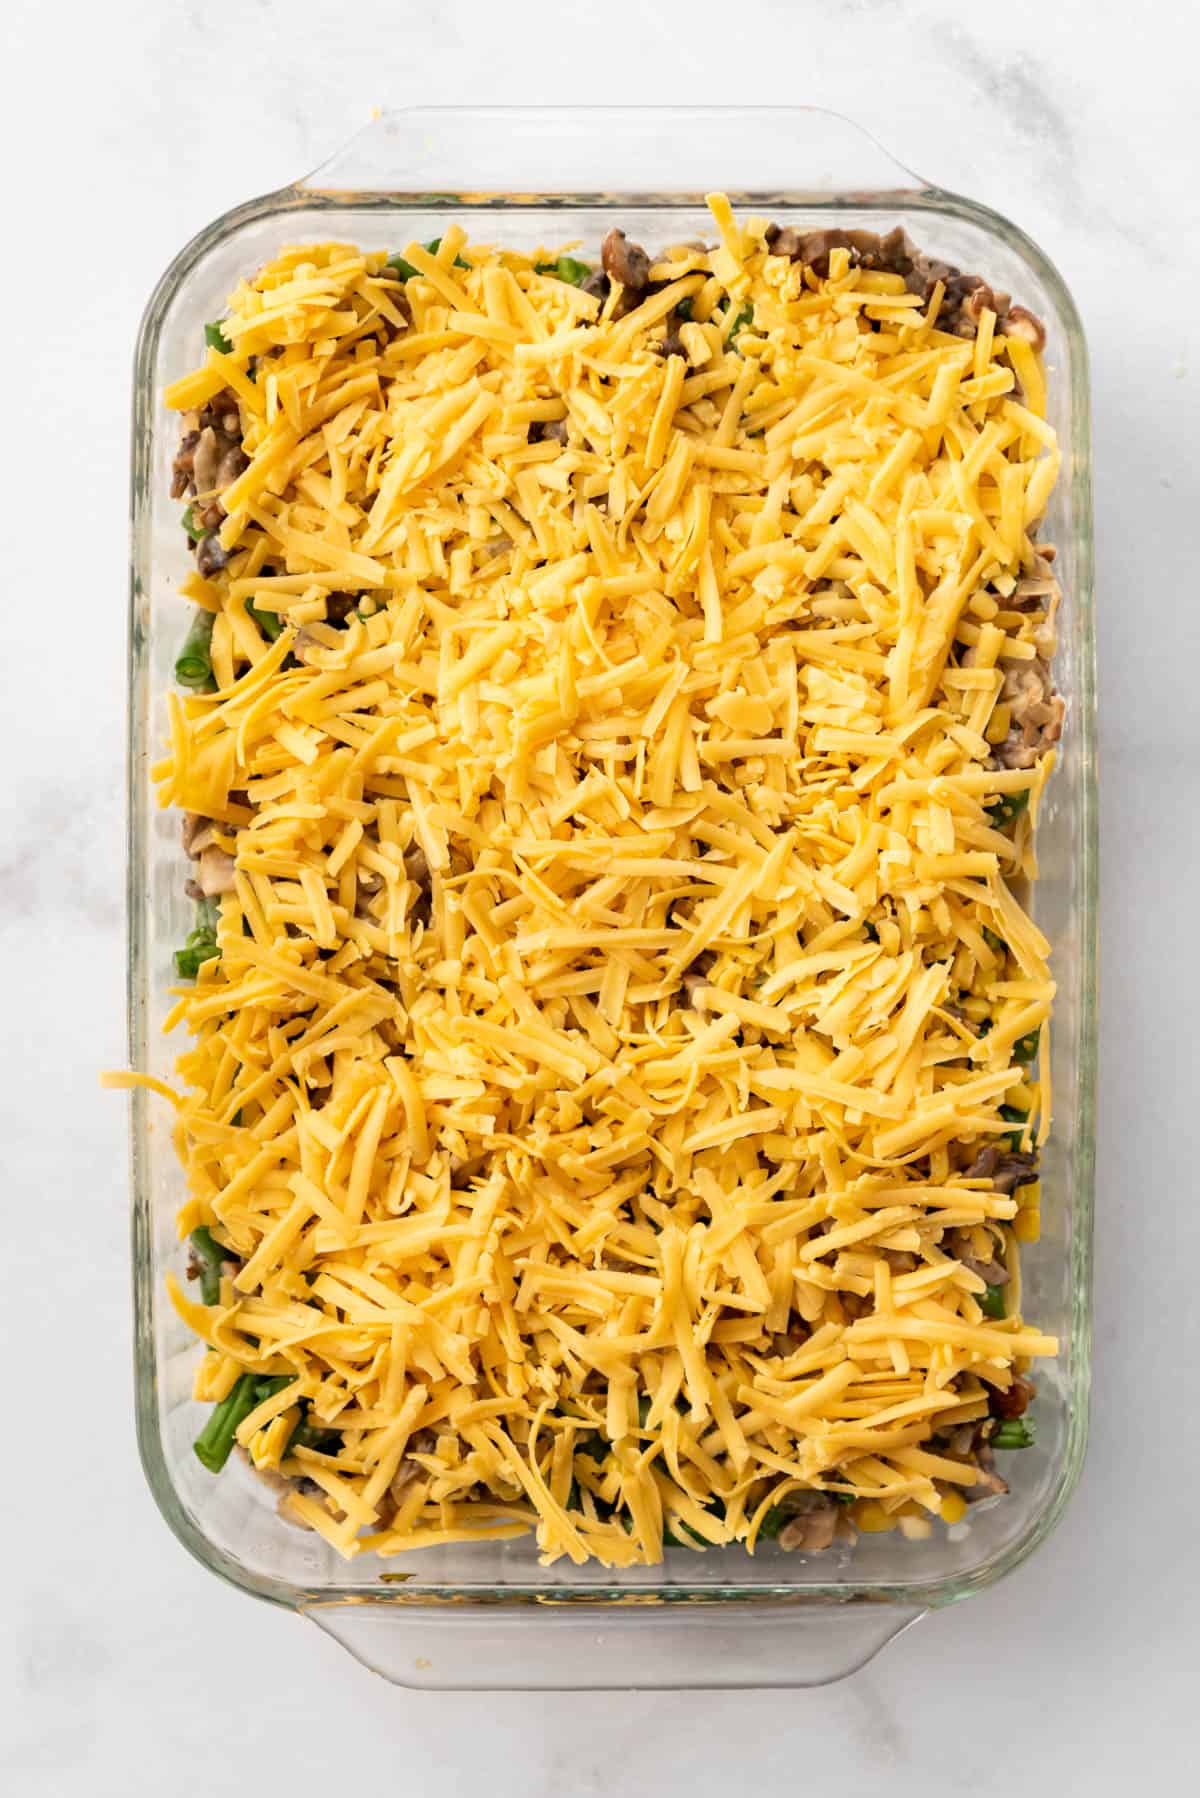 Shredded cheese sprinkled over ground beef and vegetable filling in a casserole dish.